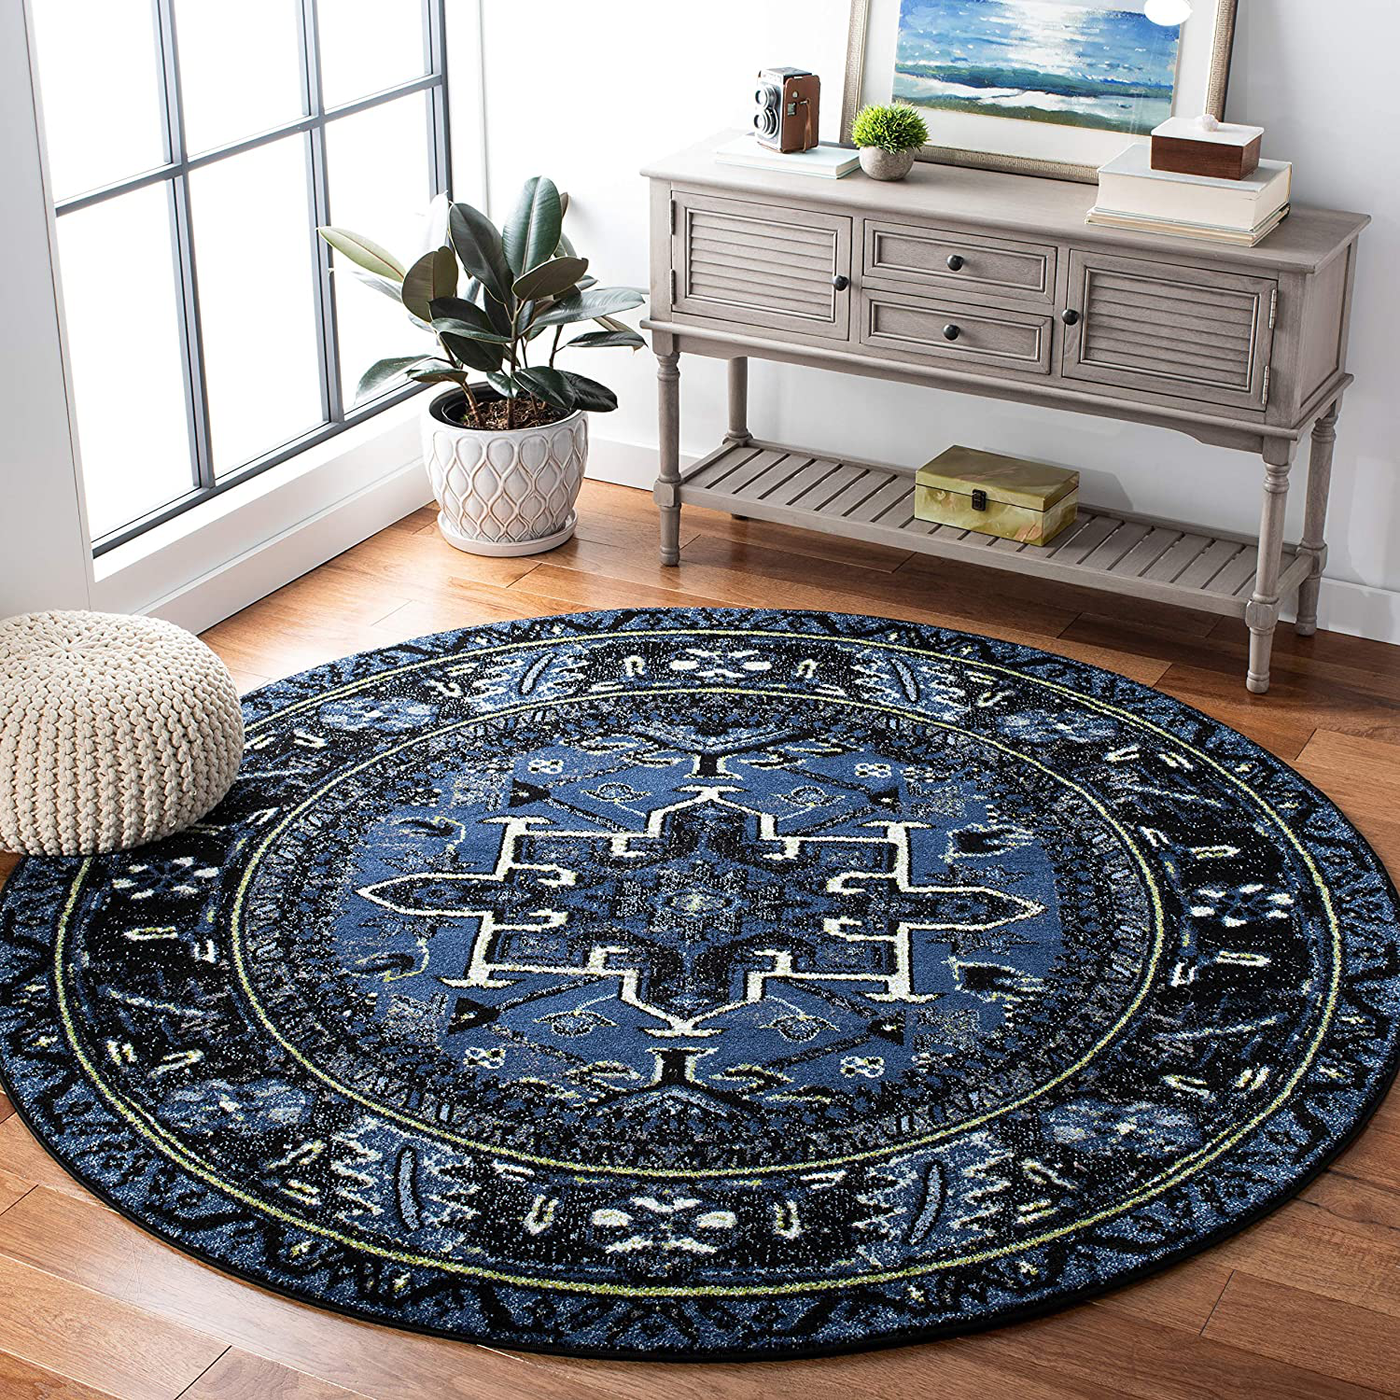 Safavieh Vintage Hamadan Collection VTH211N Oriental Traditional Persian Non-Shedding Stain Resistant Living Room Bedroom Area Rug 3' x 3' Round Light Blue/Black